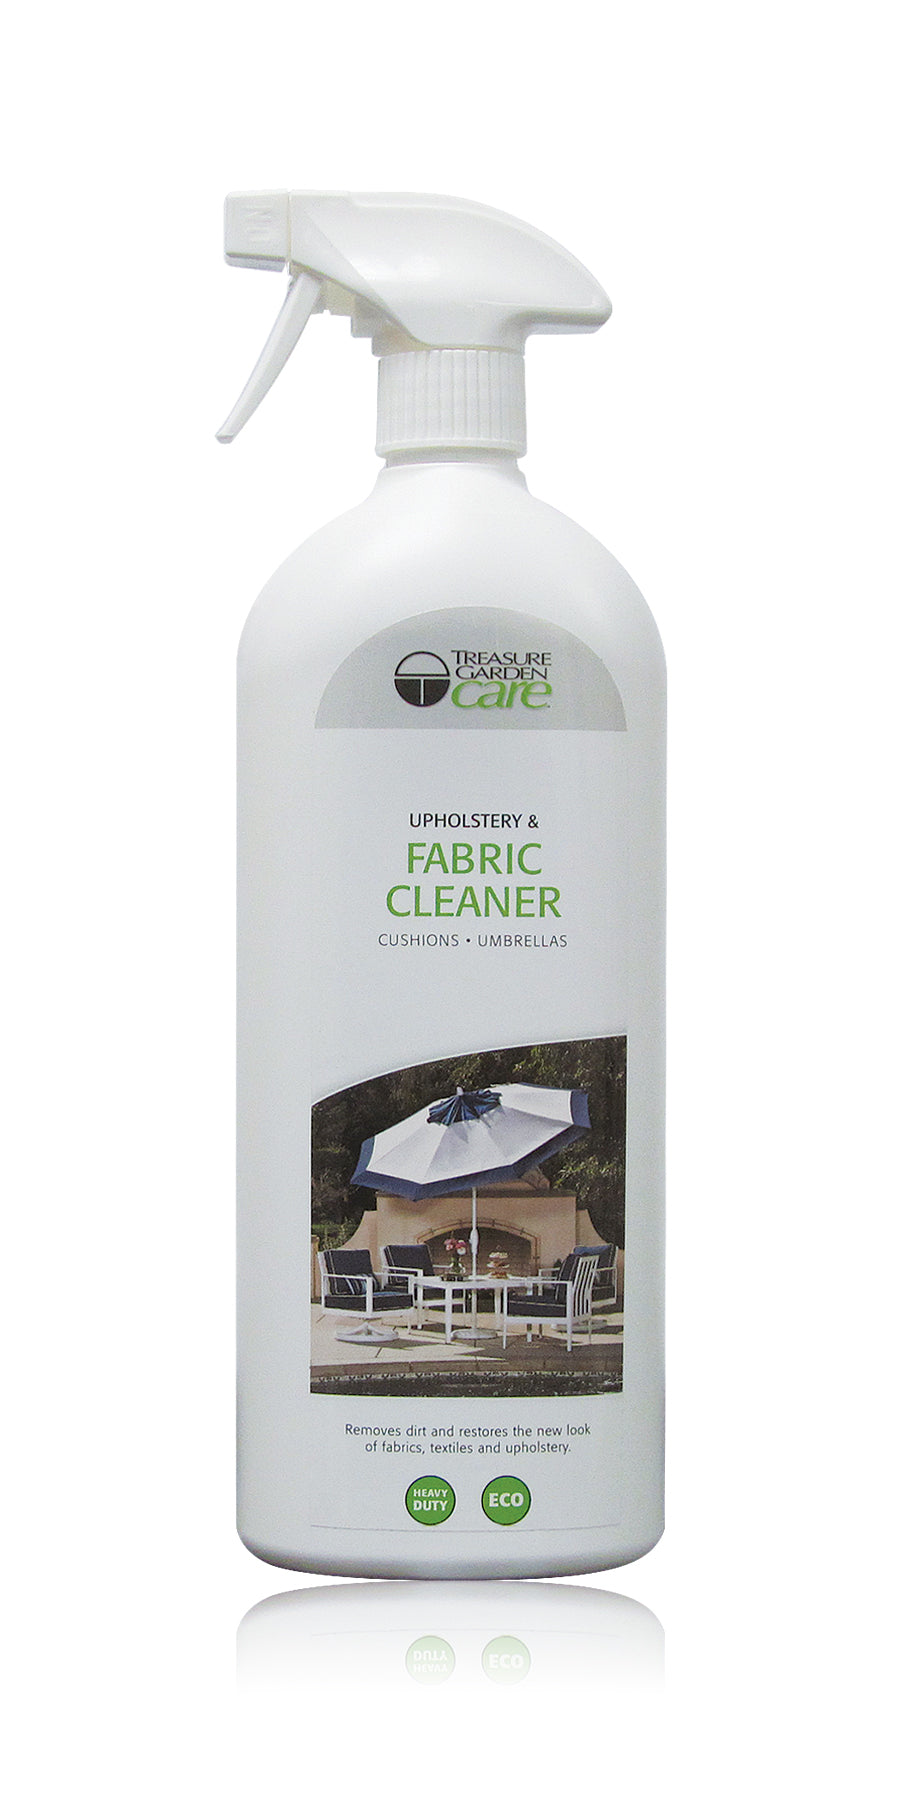 Upholstery and Fabric Cleaner